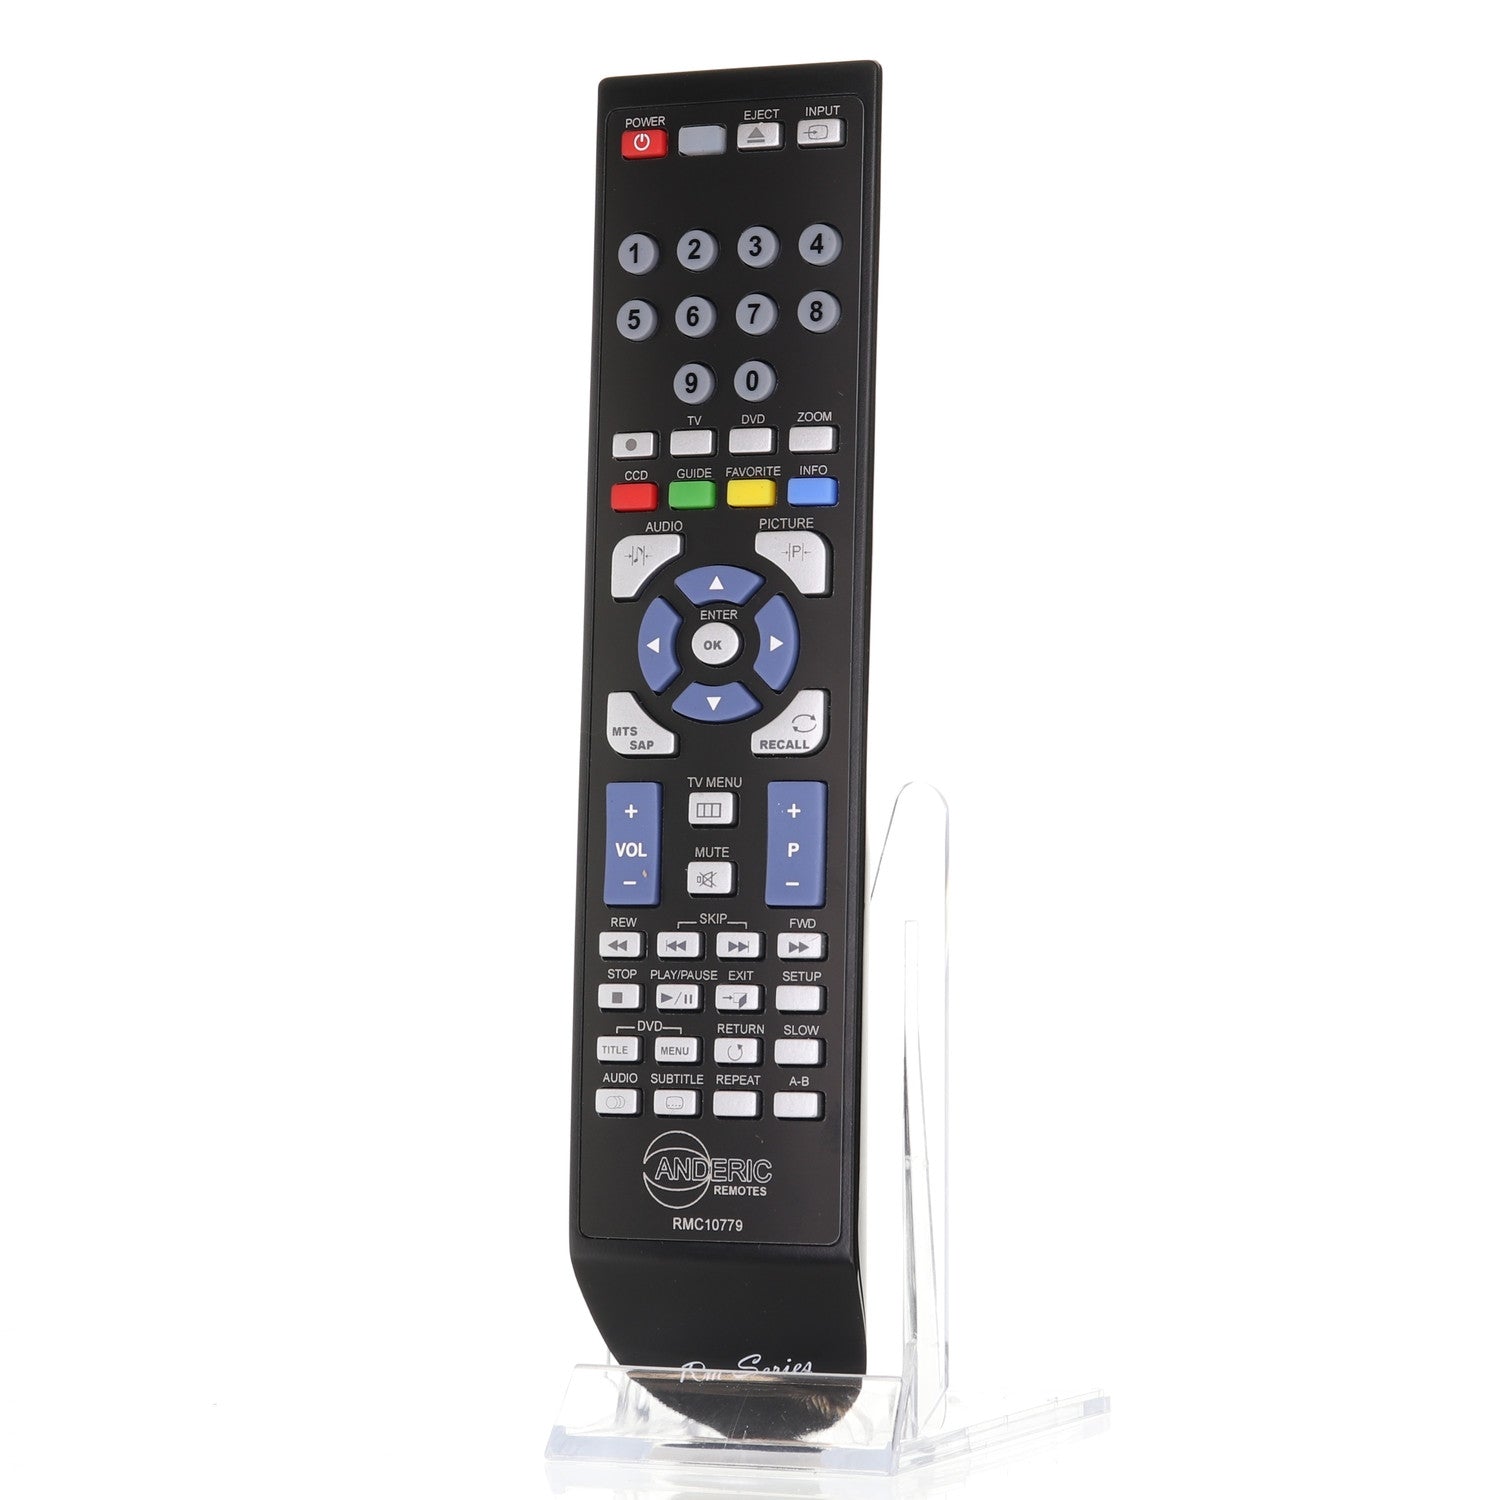 RRC260 (RC260D/RC260i) Remote Control for Insignia/Dynex TV/DVD Combos